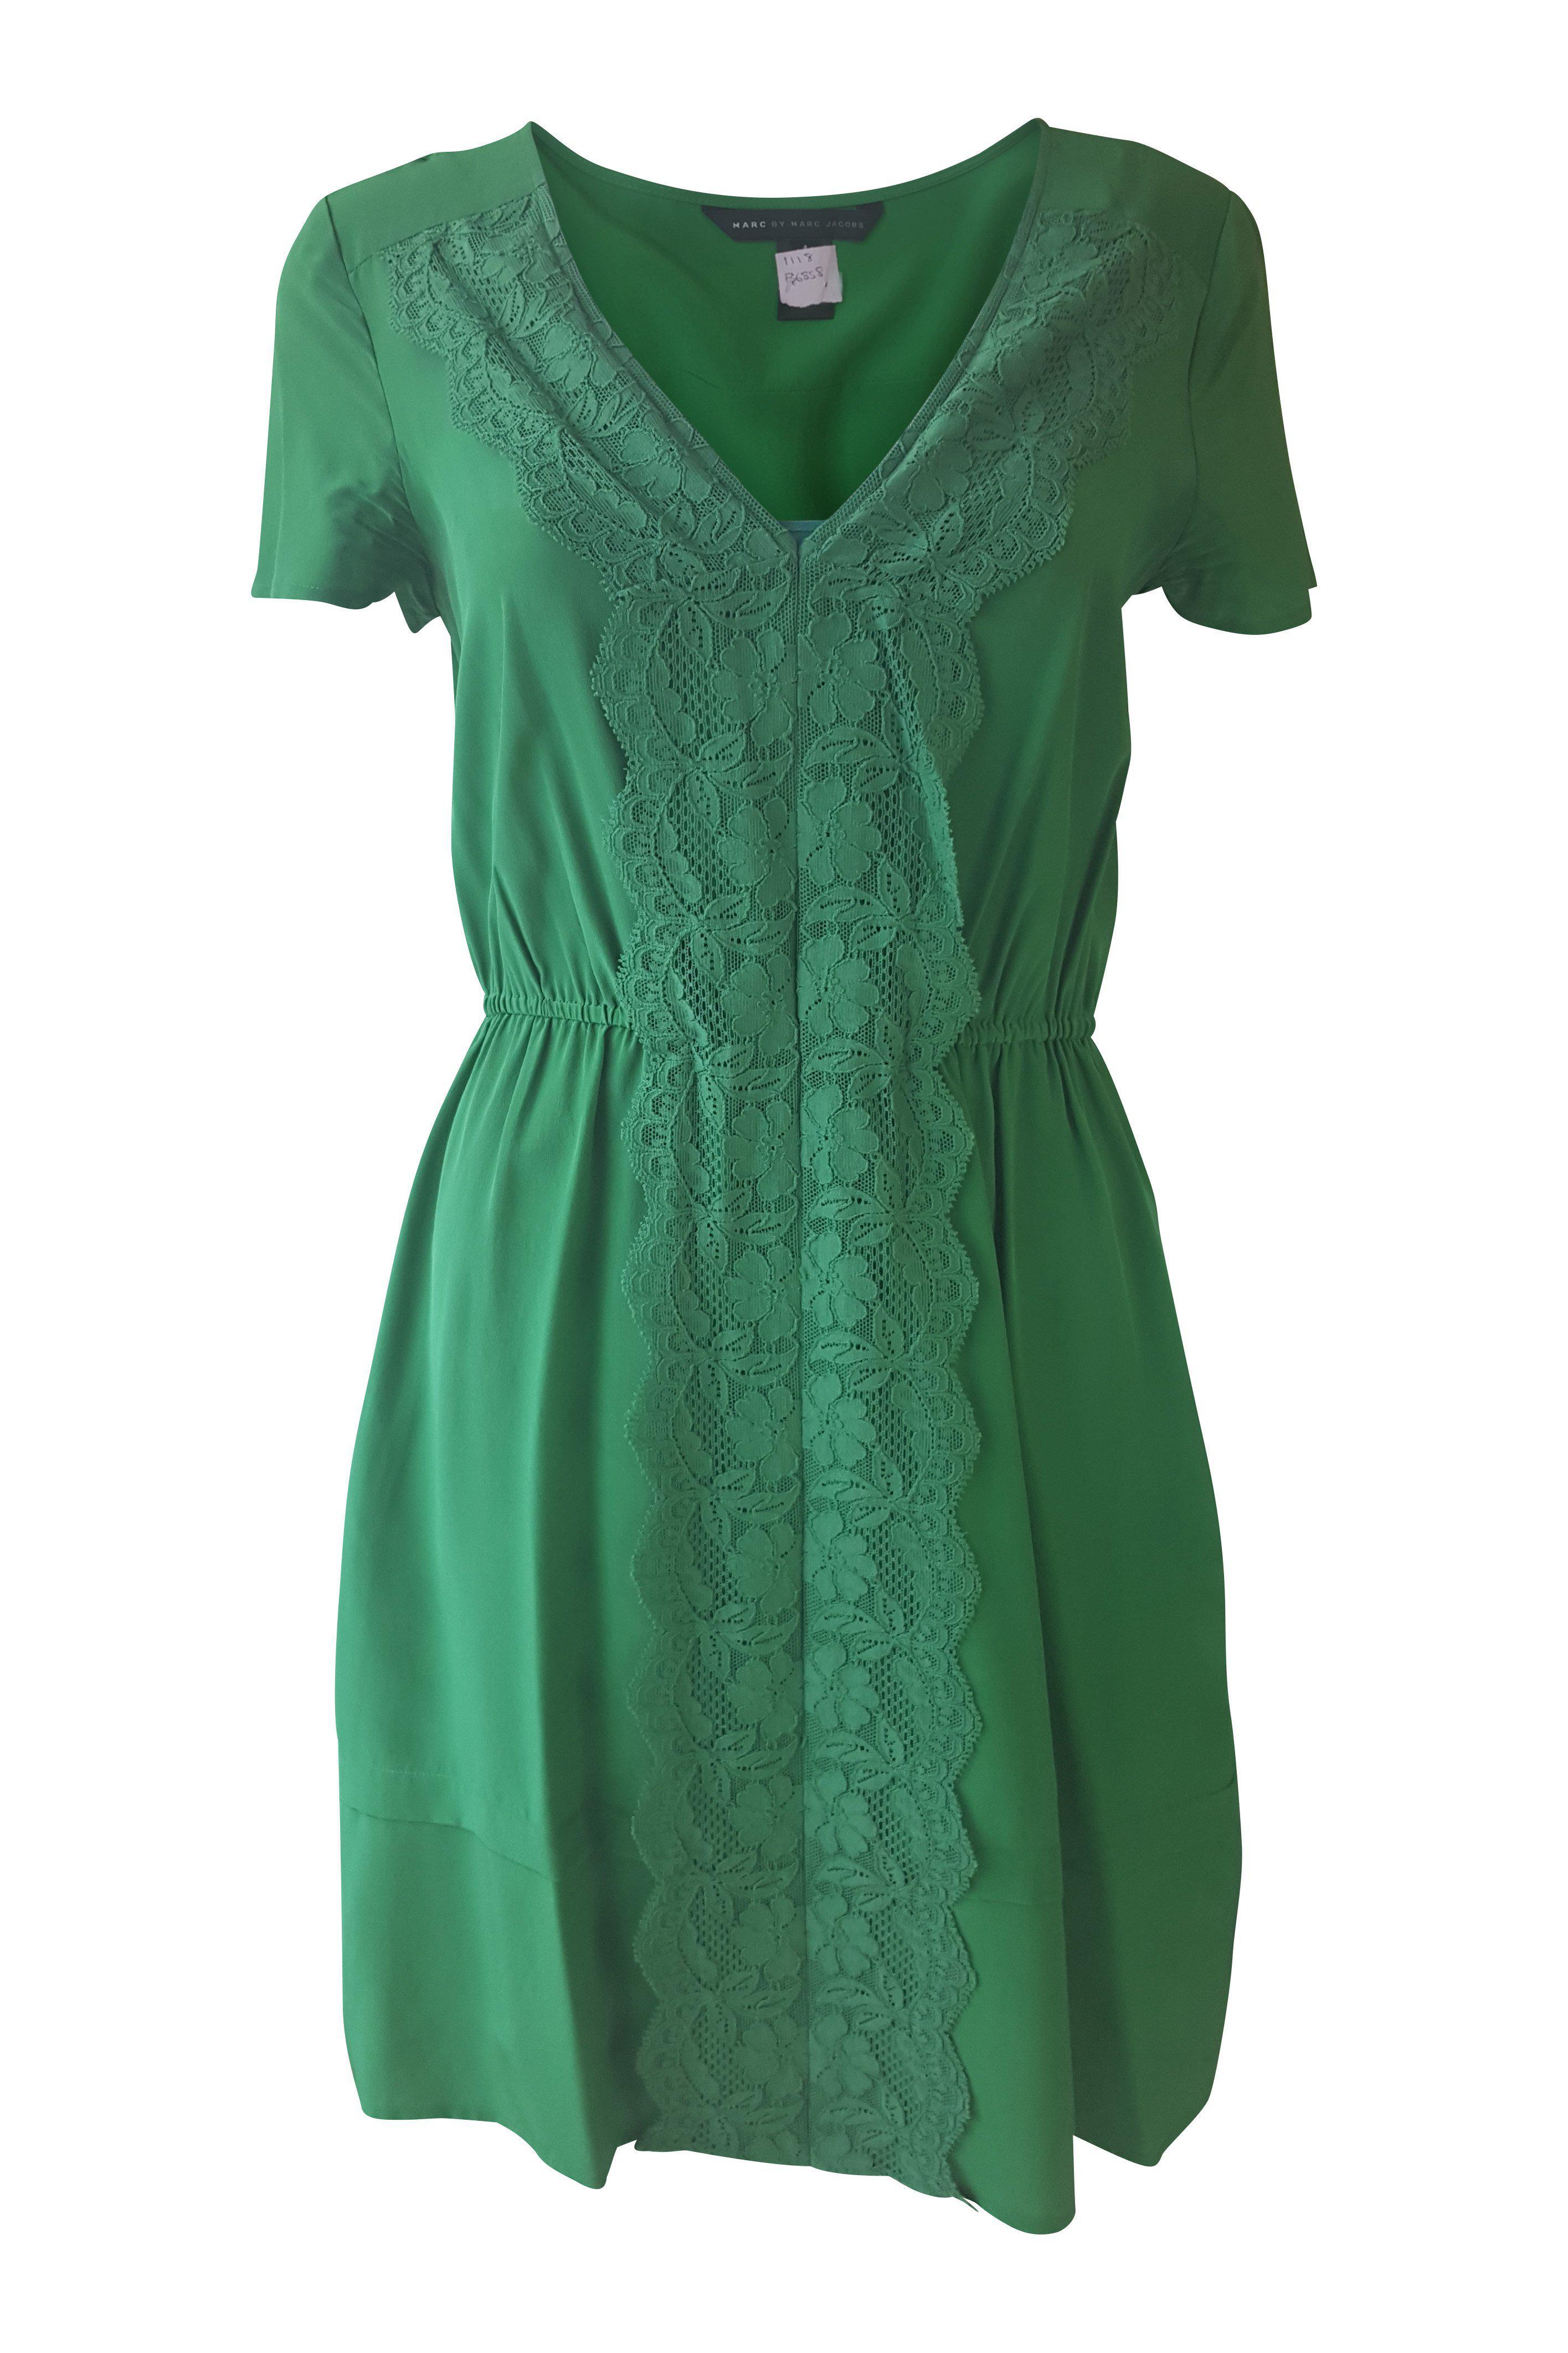 MARC JACOBS Emerald Green Lace Front Silk Dress (US 4)-Marc Jacobs-The Freperie